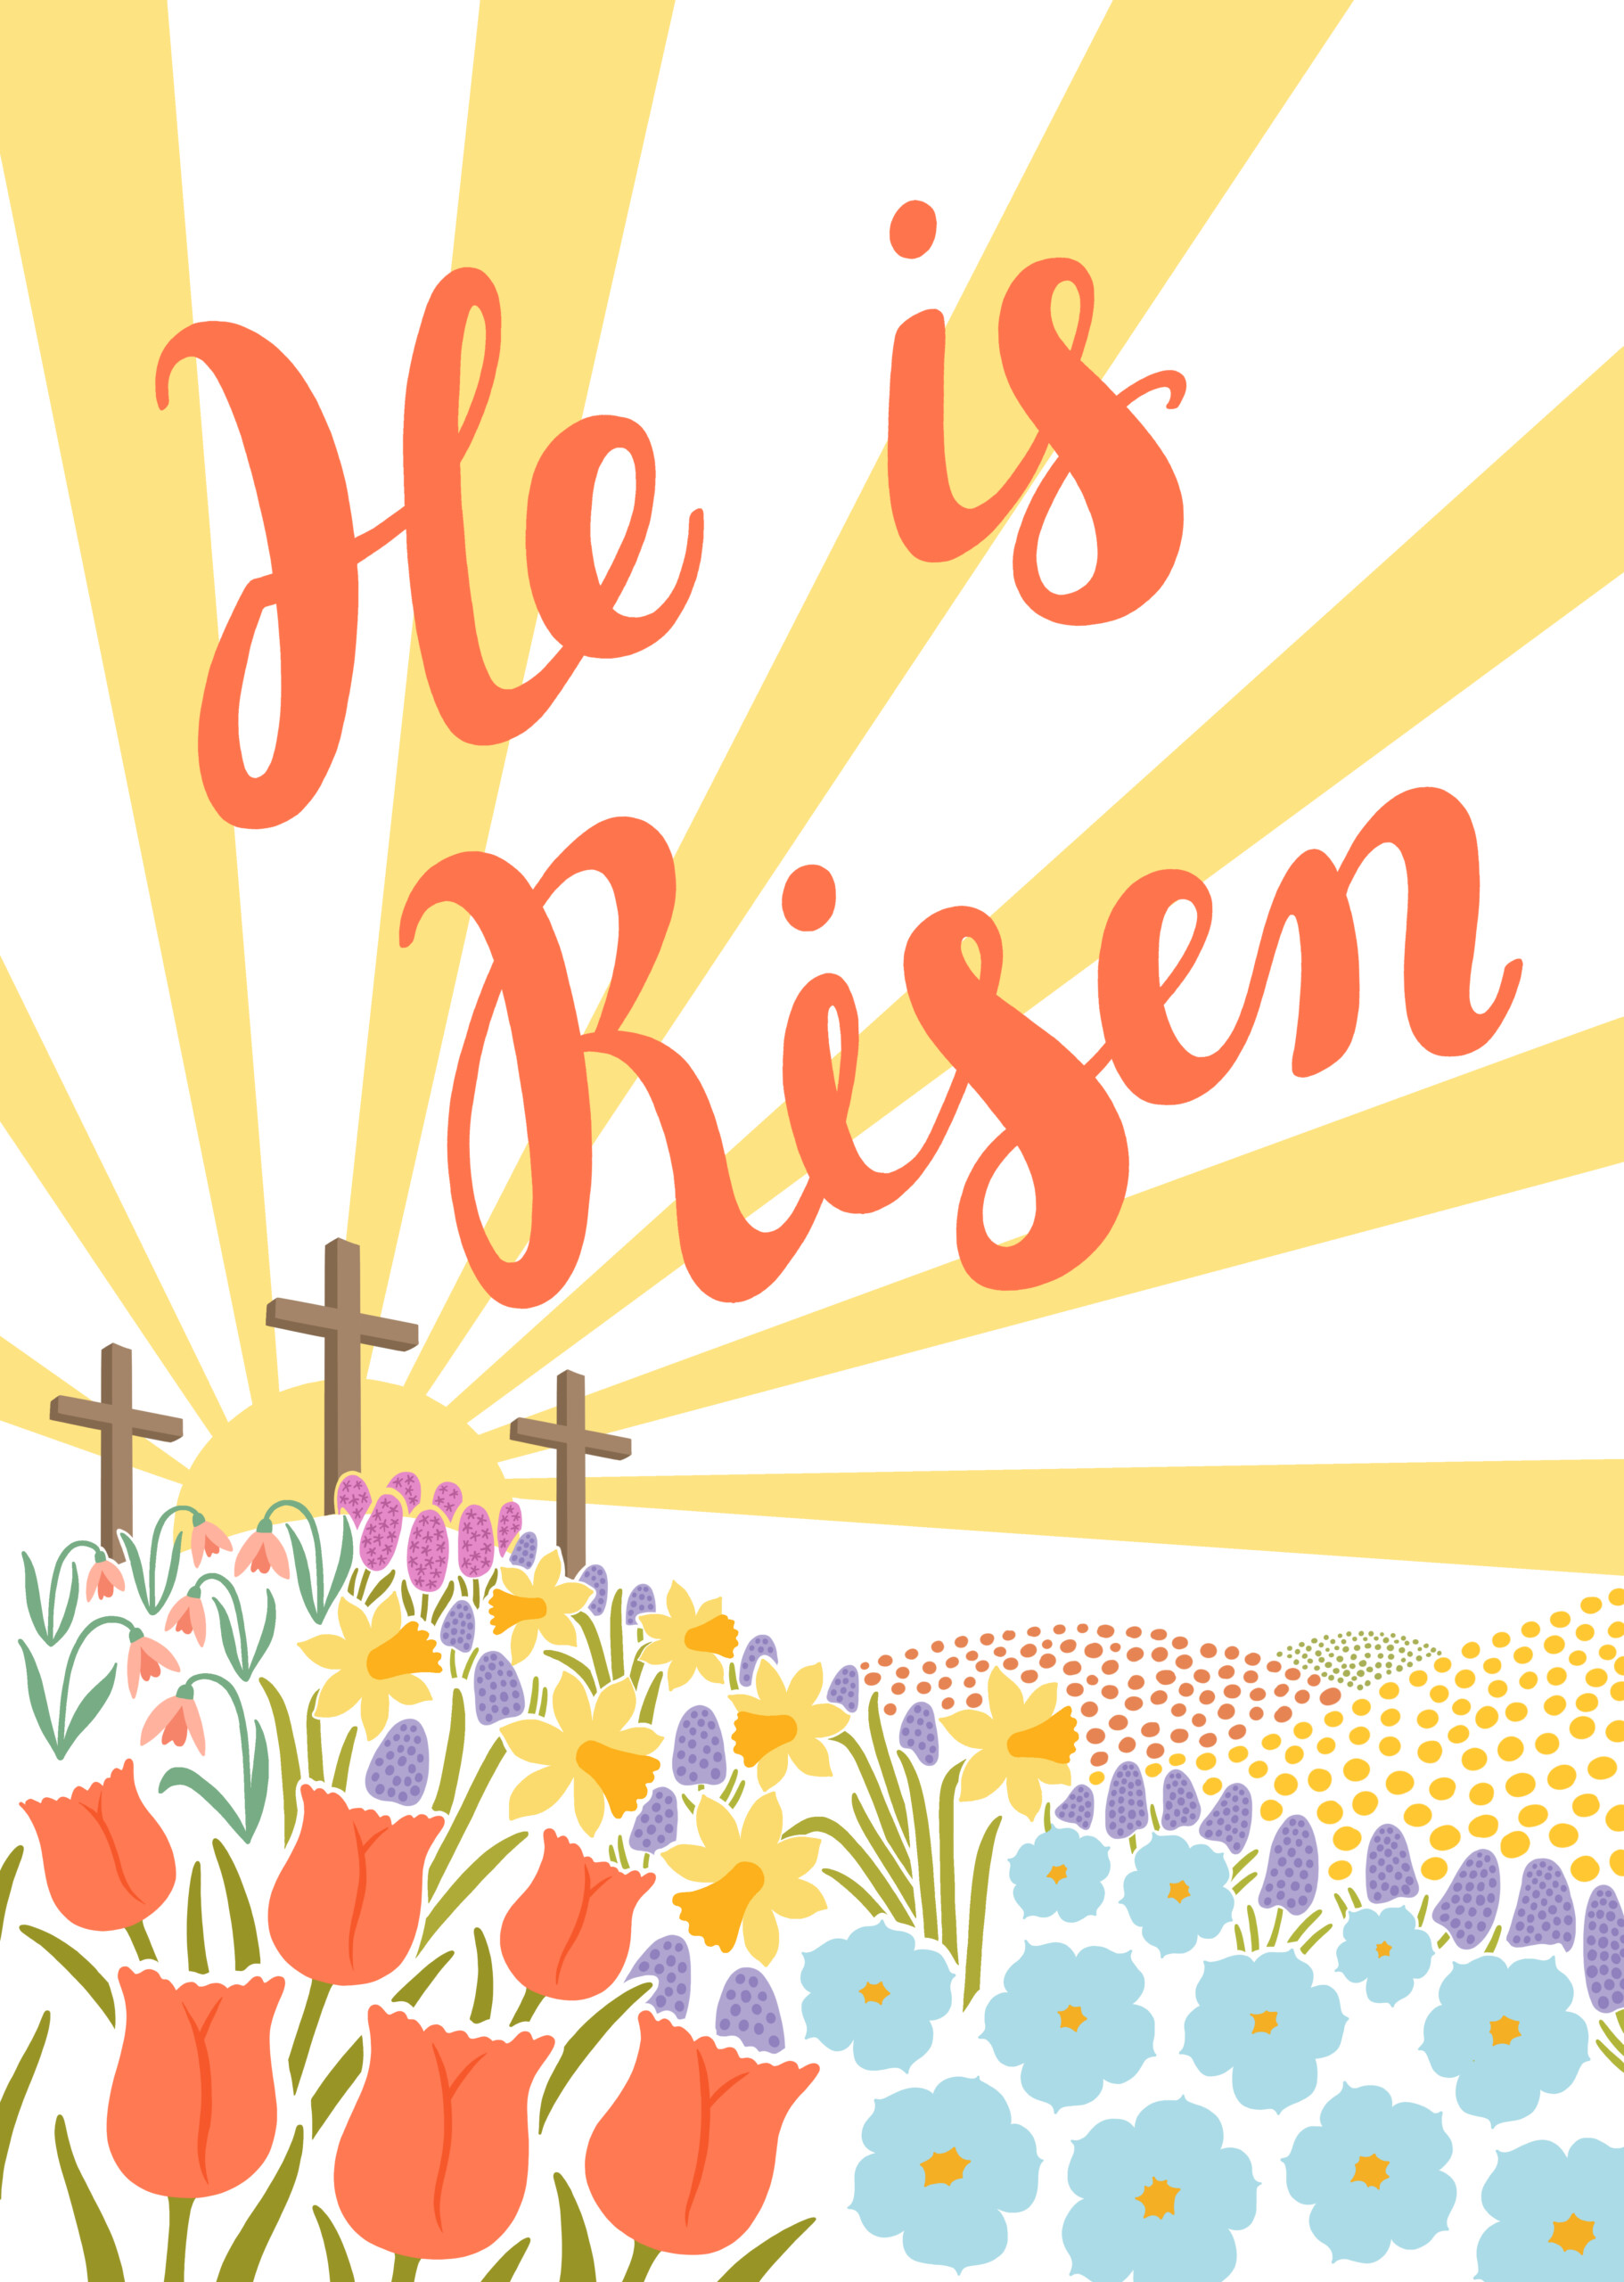 He is risen - Easter image